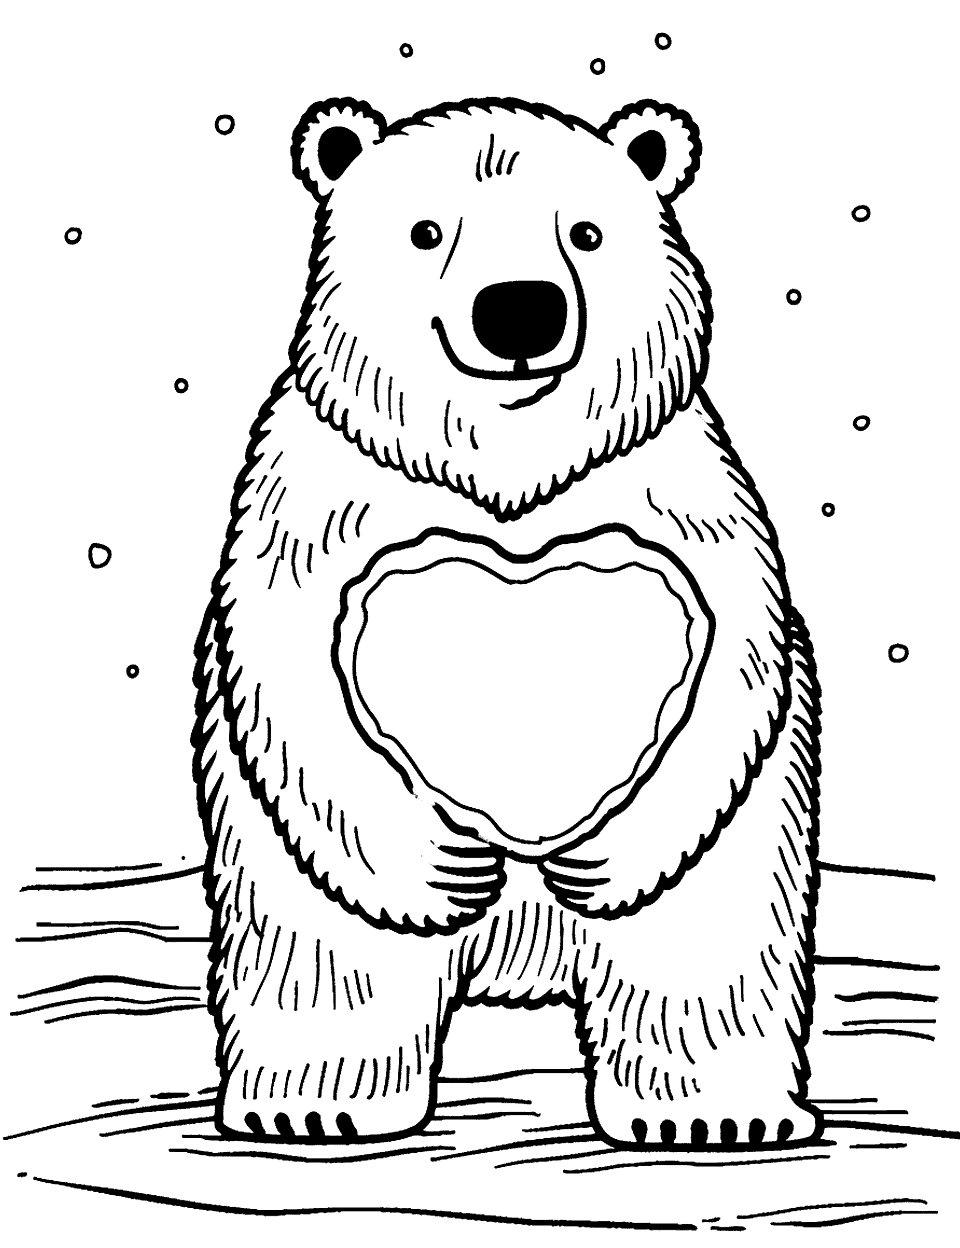 Polar Bear with Heart-Shaped Snow Coloring Page - A polar bear holding a large heart-shaped snow clump.